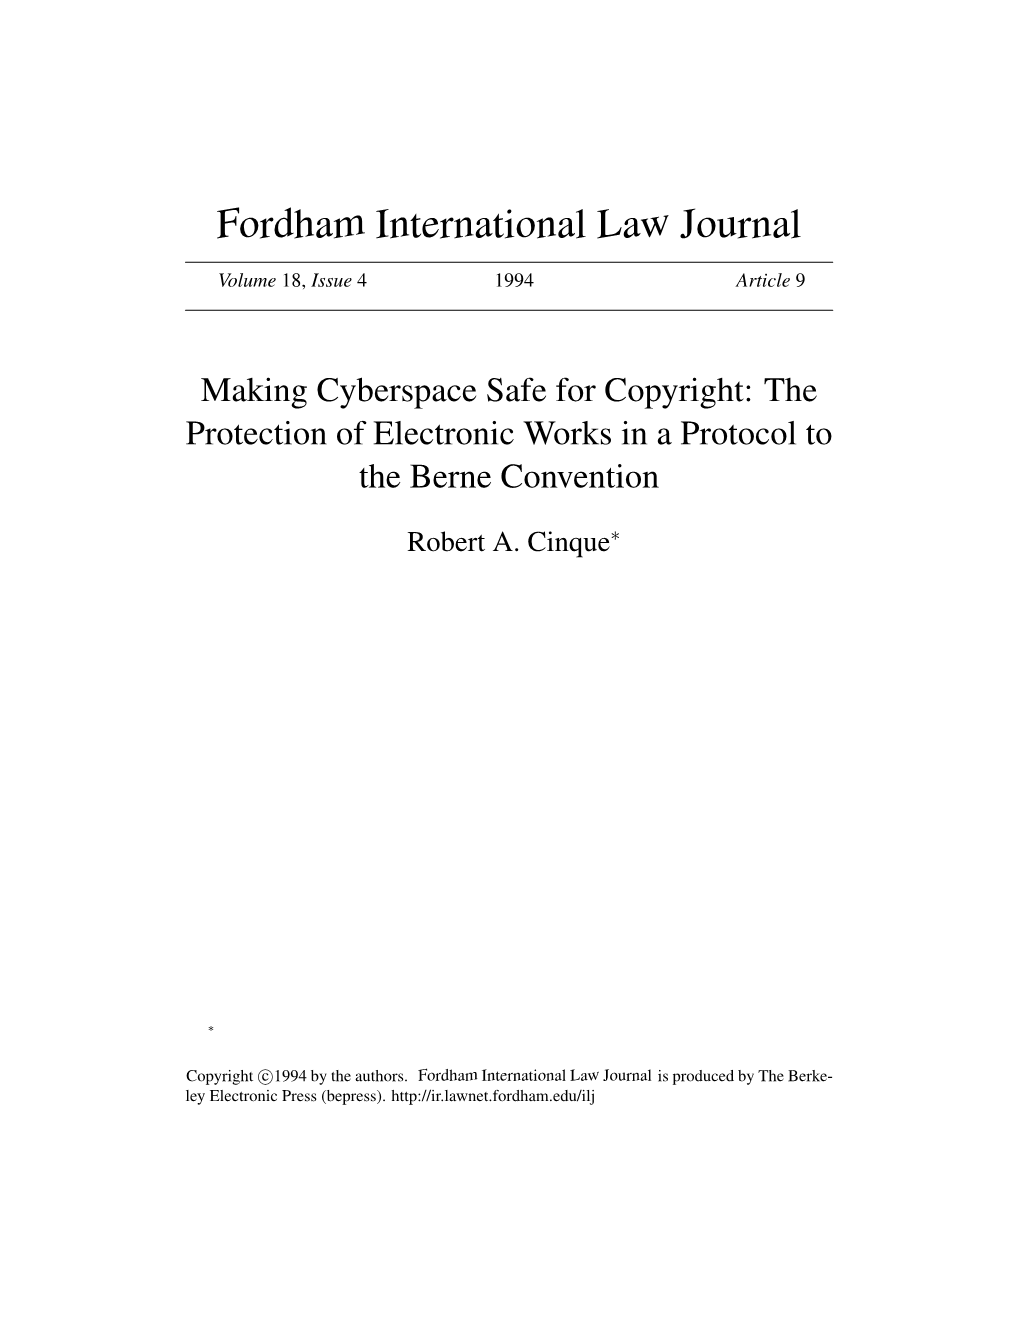 Making Cyberspace Safe for Copyright: the Protection of Electronic Works in a Protocol to the Berne Convention